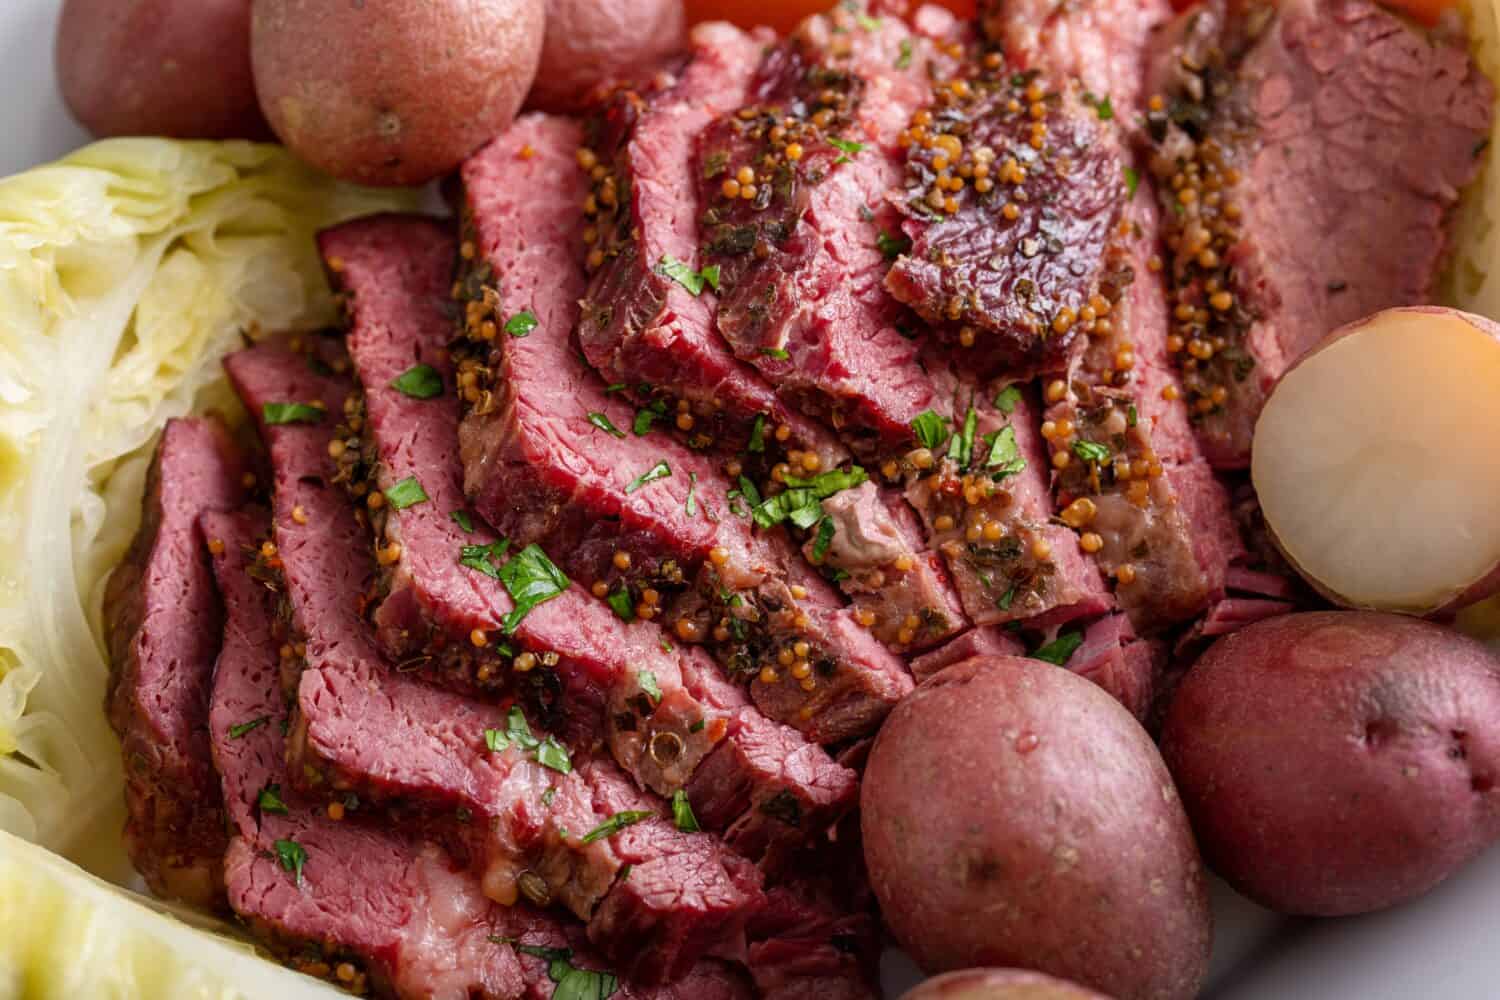 Corned beef with cabbage and potatoes on a serving platter, irish recipe idea for St Patricks day